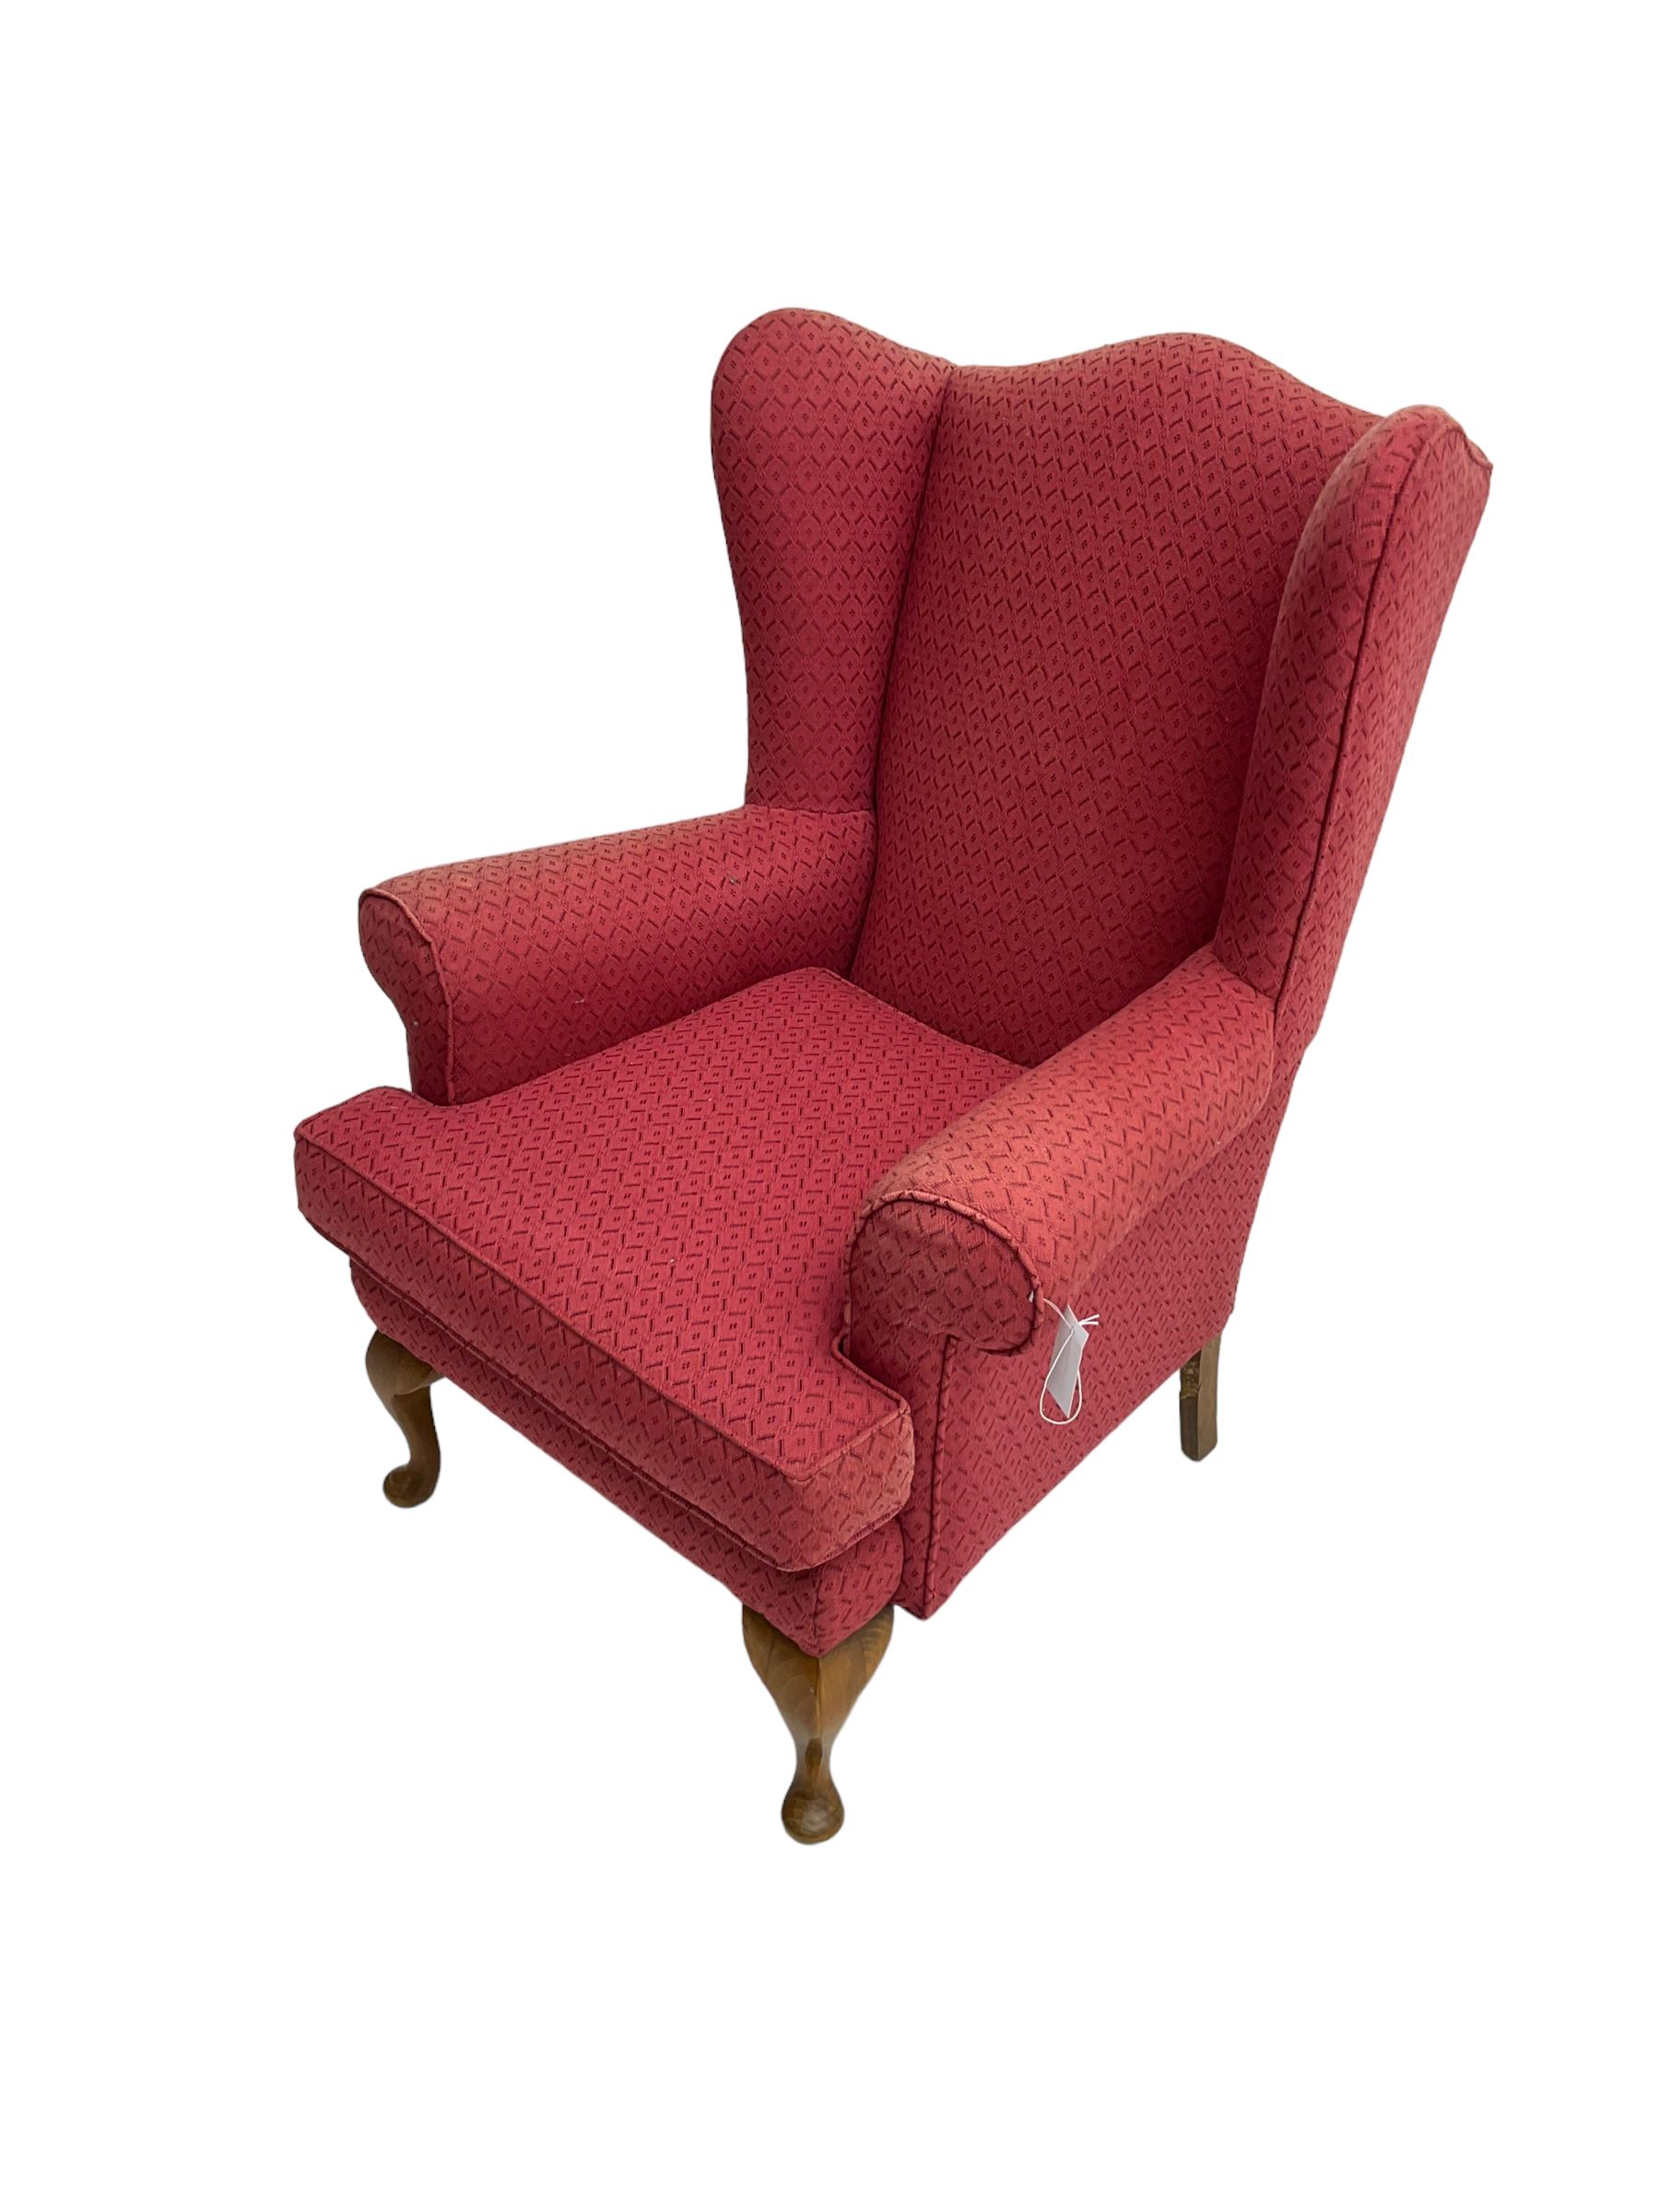 Queen Anne design wingback armchair - Image 7 of 7